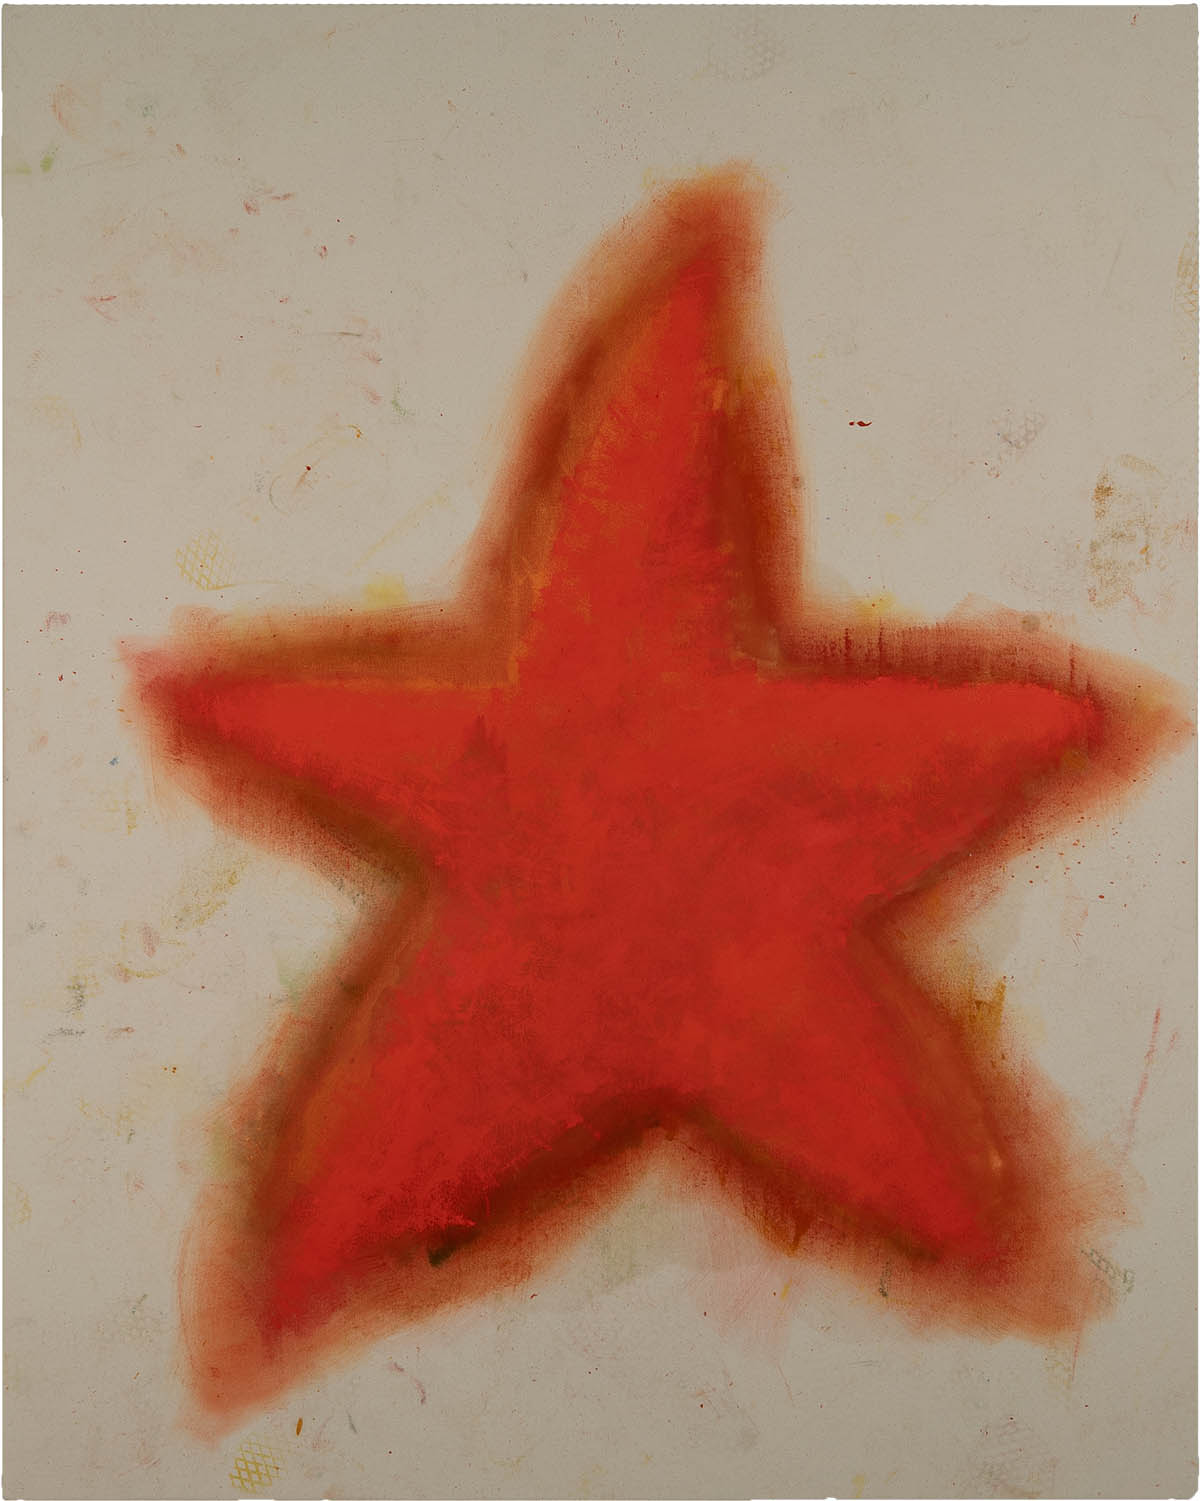 STAR, 2021, Oil, raw pigment, gesso on canvas, 152.5 x 121.90 cm | courtesy of the artist and Stallmann.